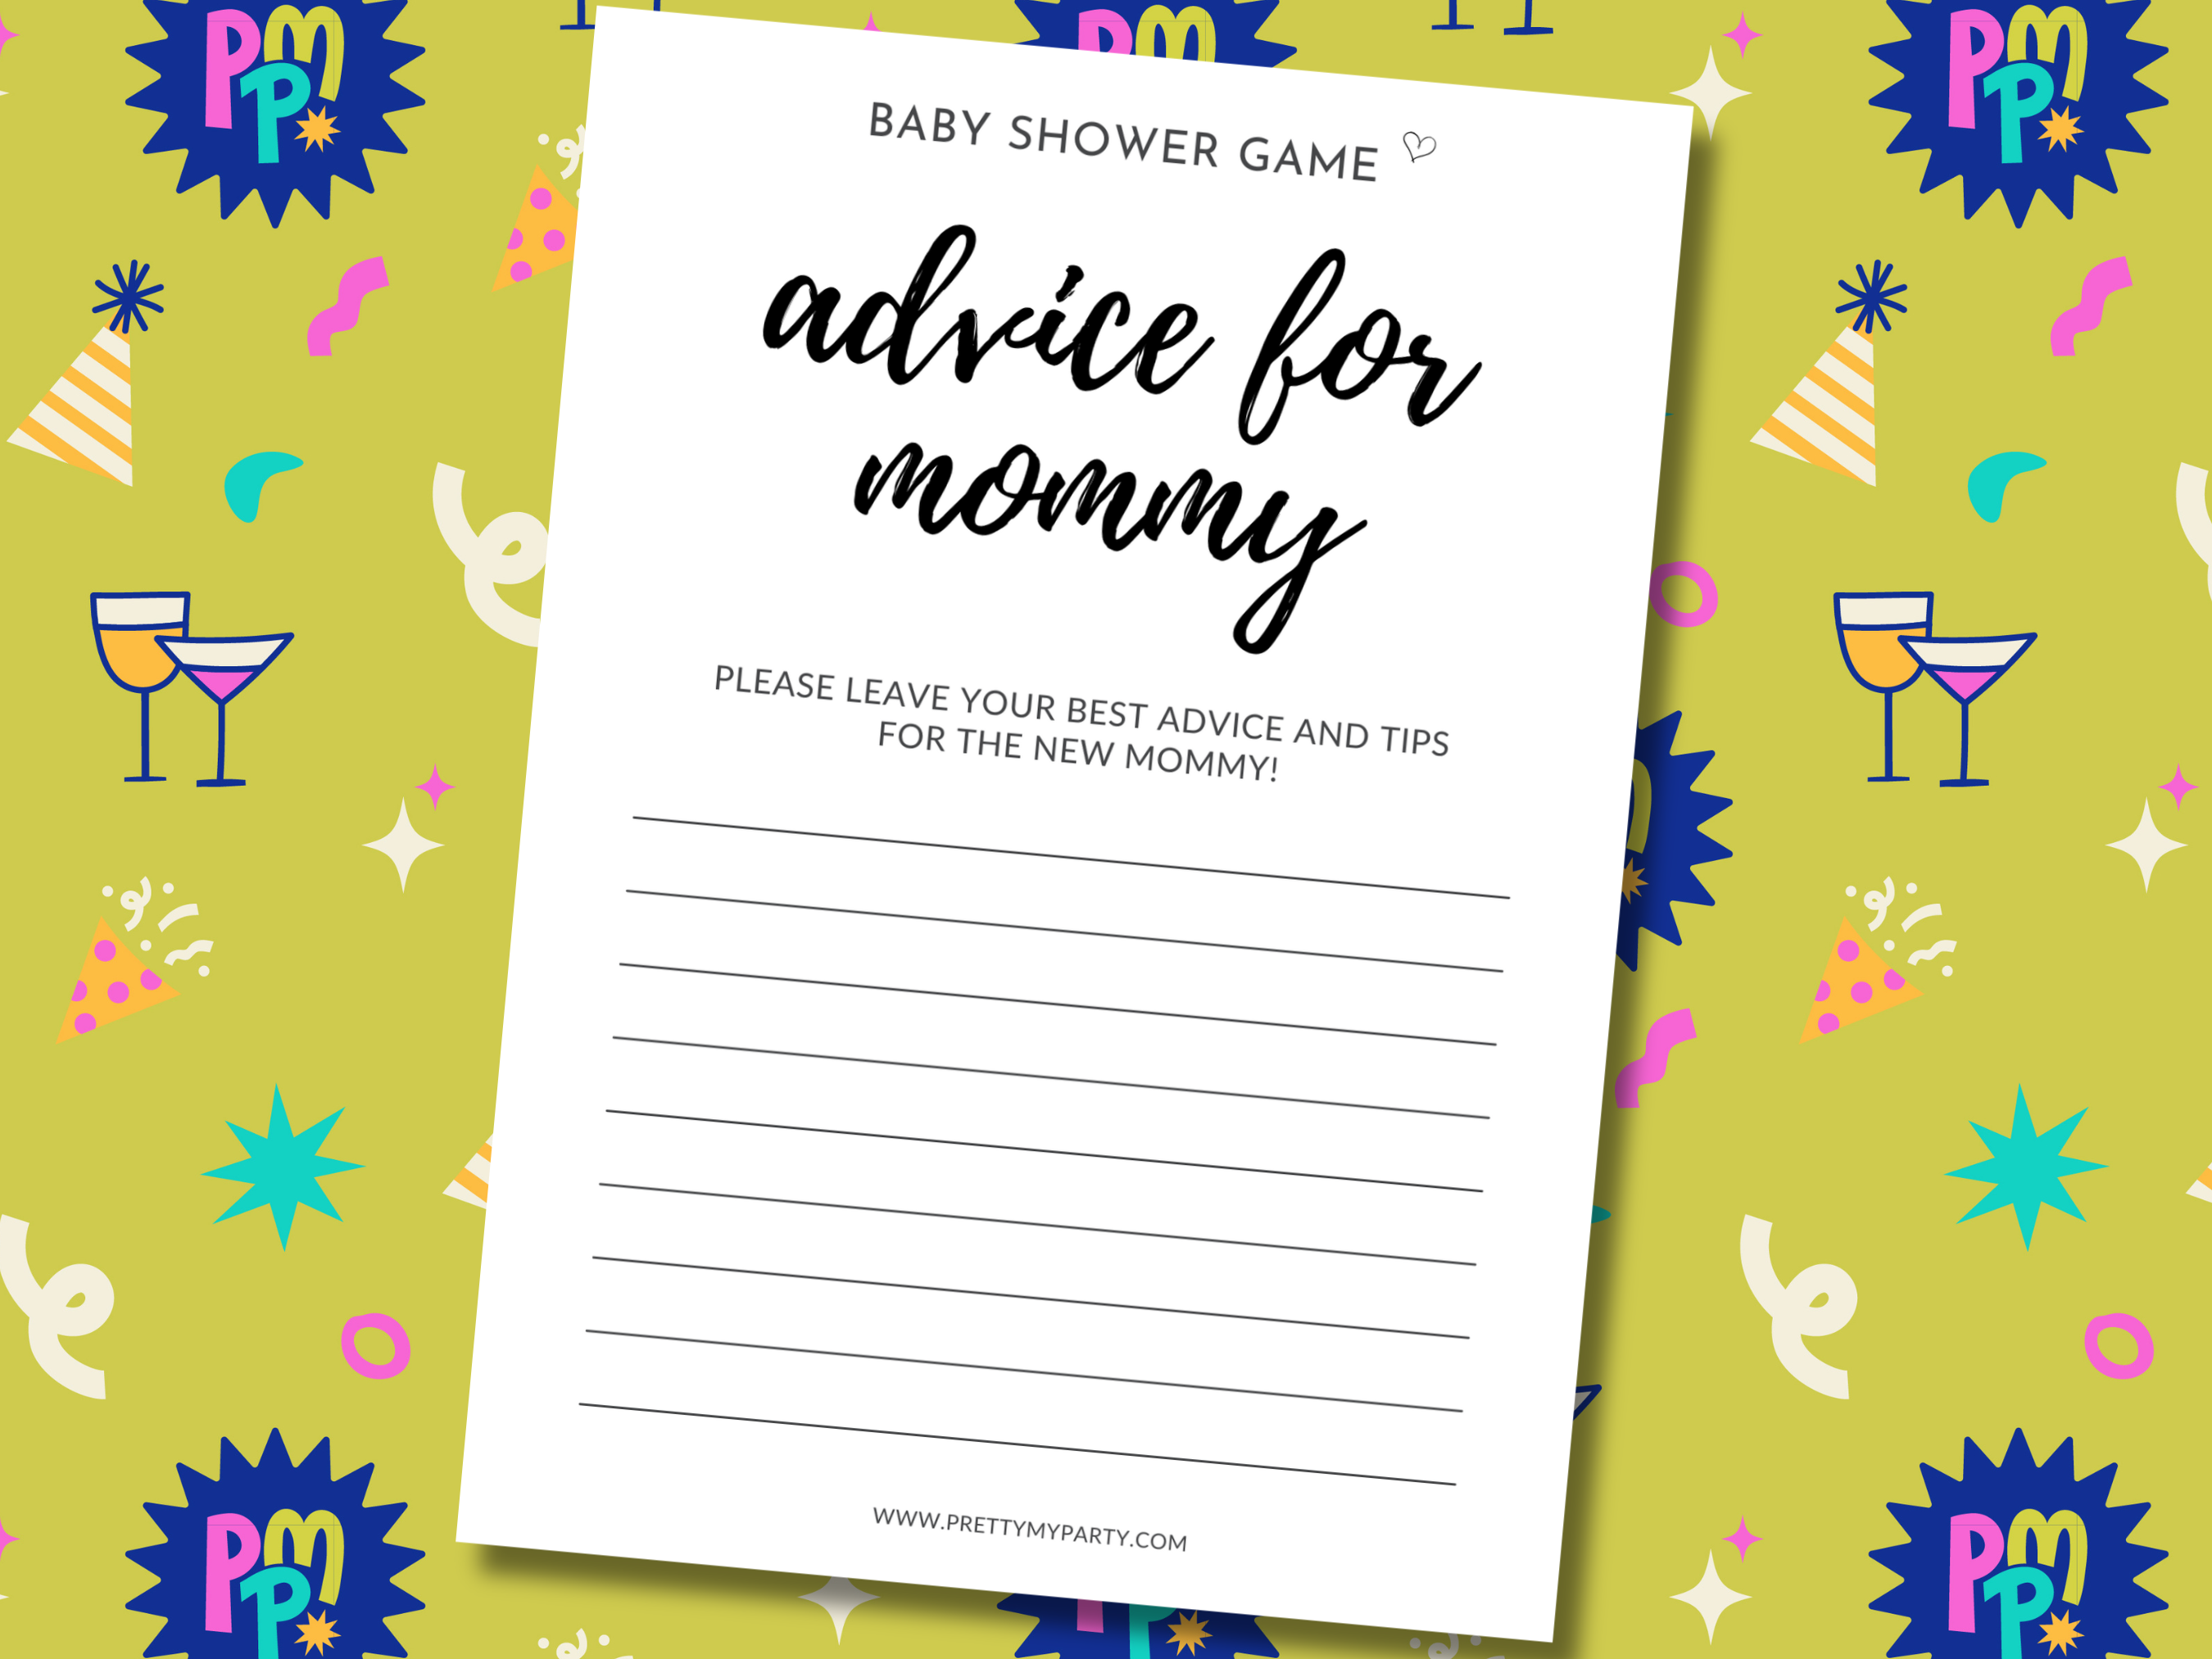 Advice For Mommy Free Printable Baby Shower Game on Pretty My Party